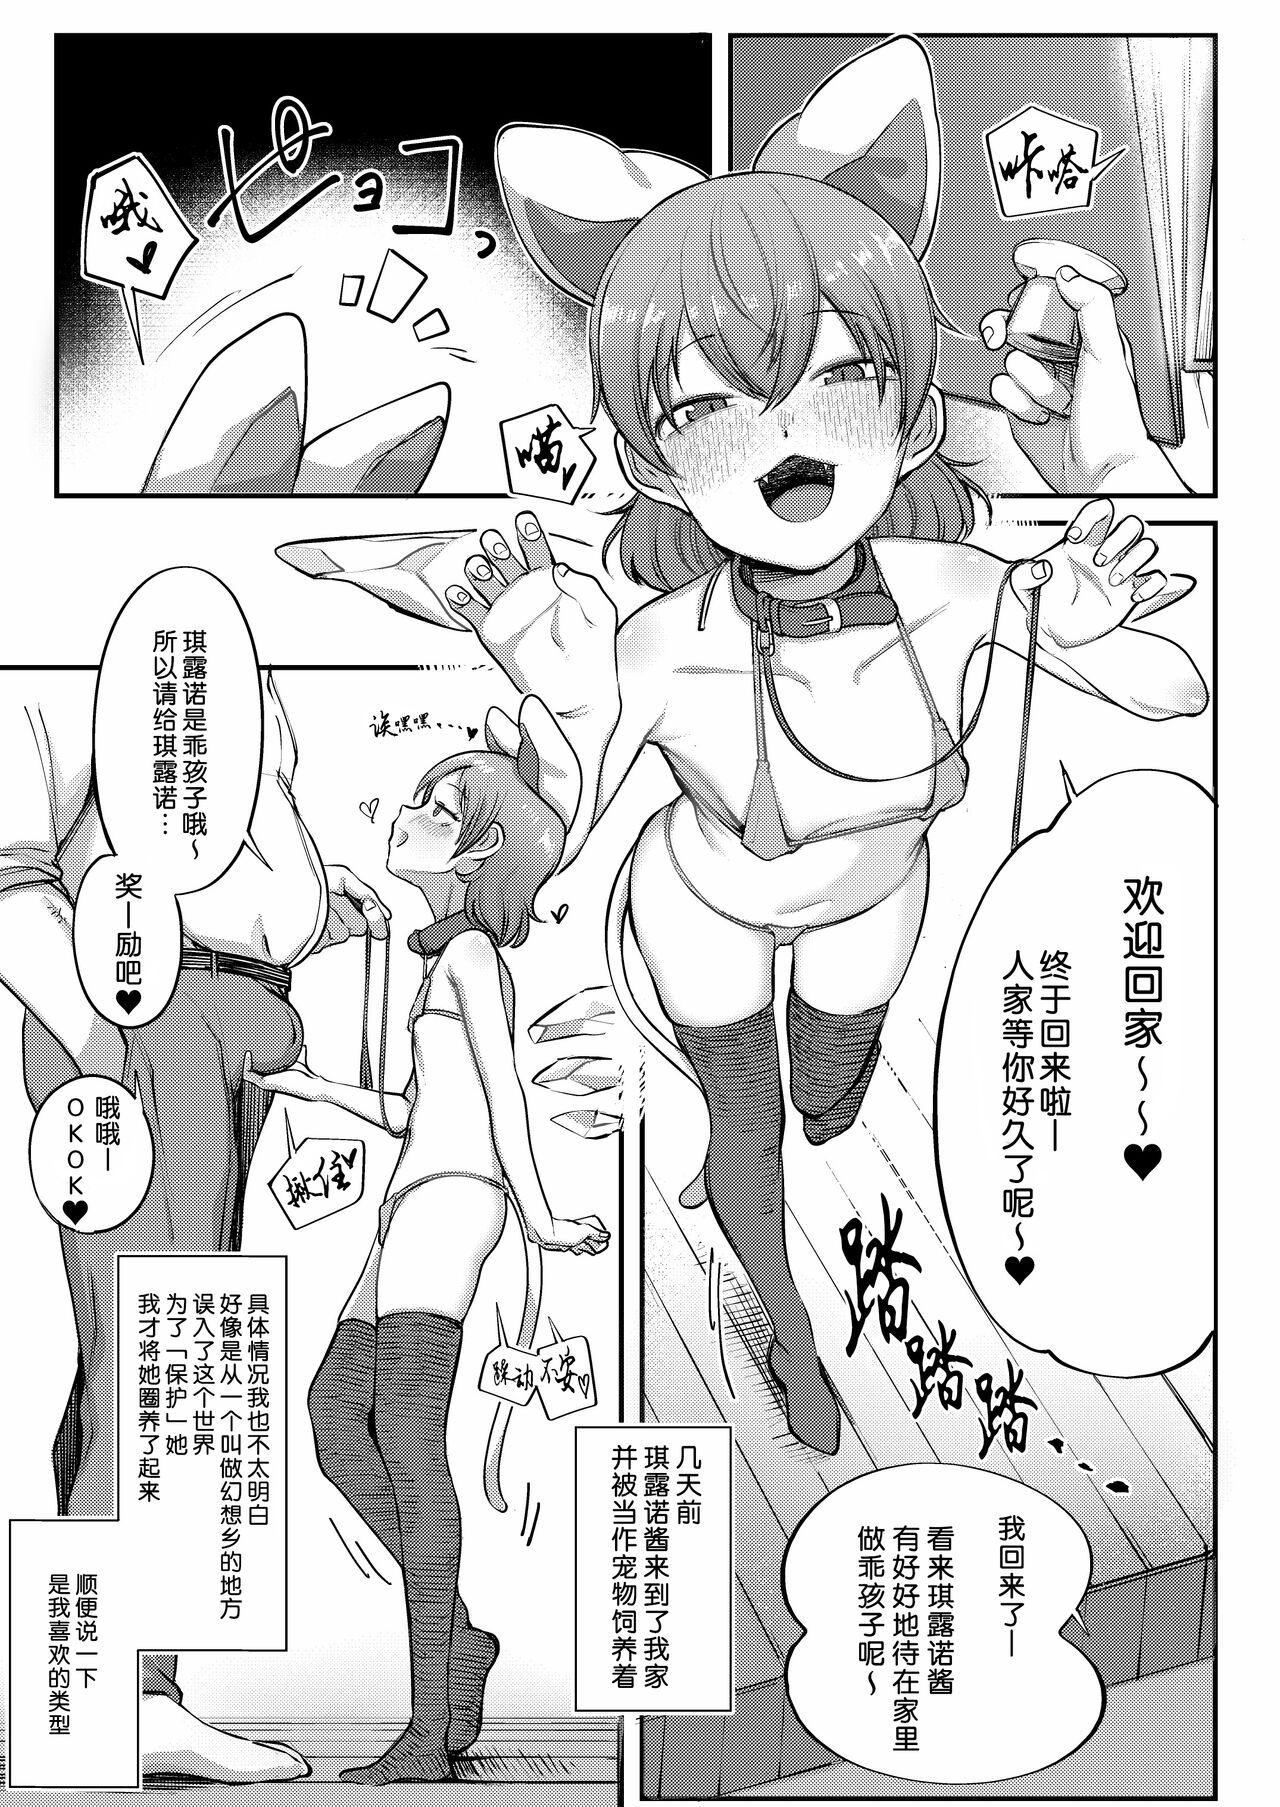 Bedroom Cirno to Cirno - Touhou project Real - Page 2